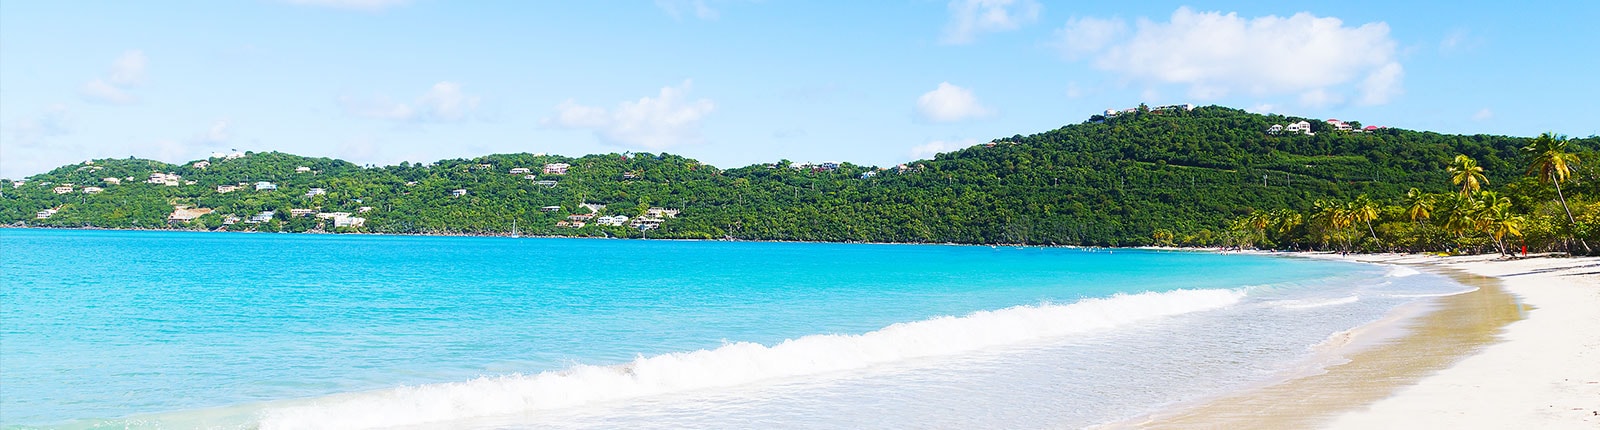 Bright blue waters lapping the beach in St. Thomas, US Virgin Islands